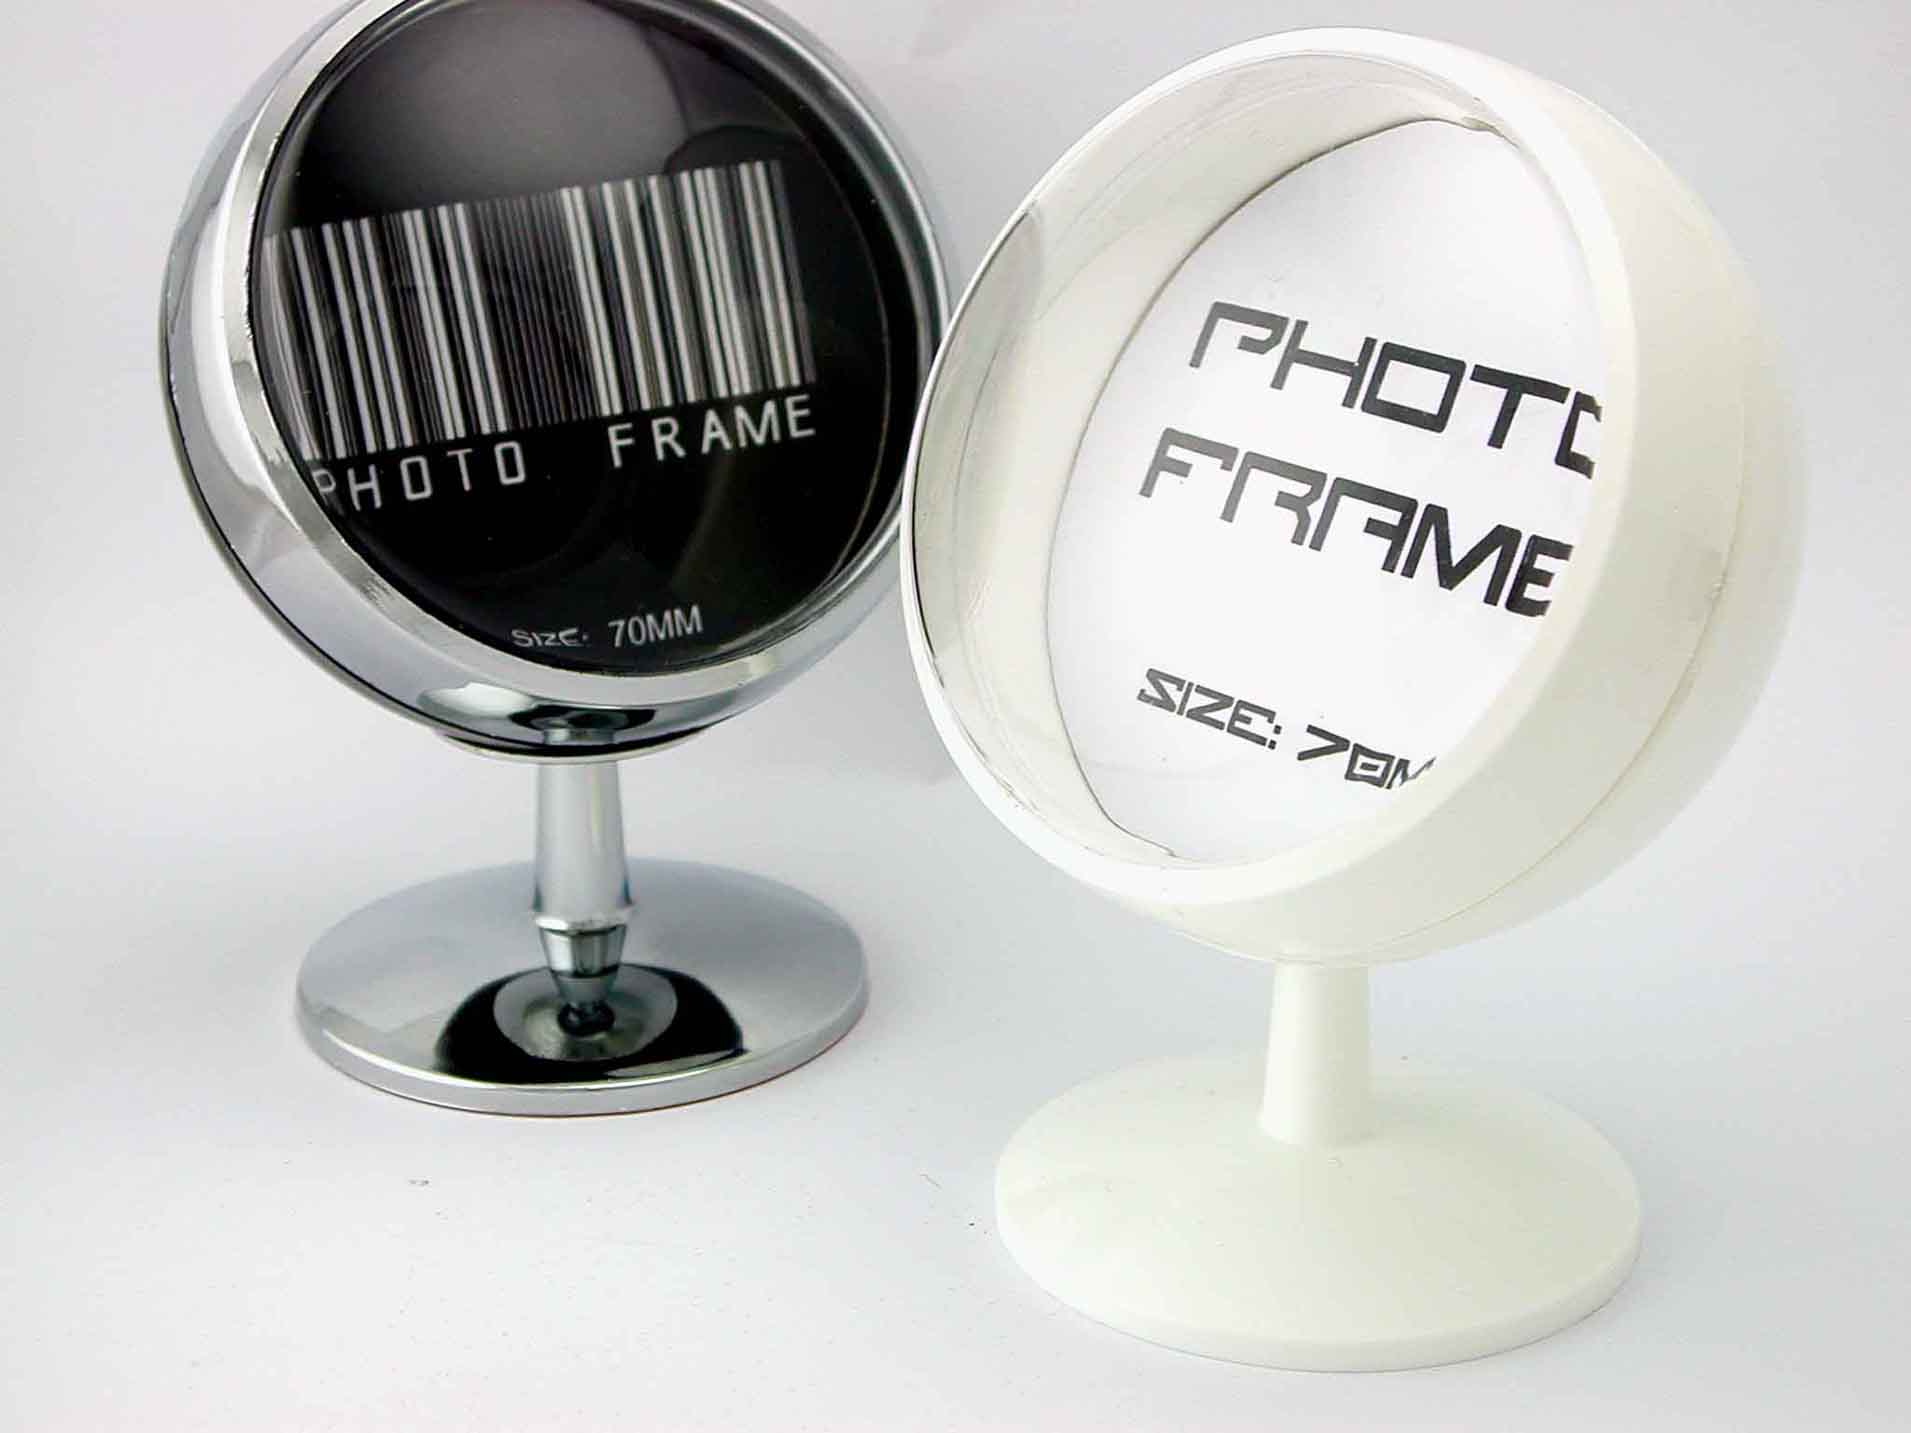  our item - Plastic Ball Shape Photo Frame With Stand ( our item - Plastic Ball Shape Photo Frame With Stand)